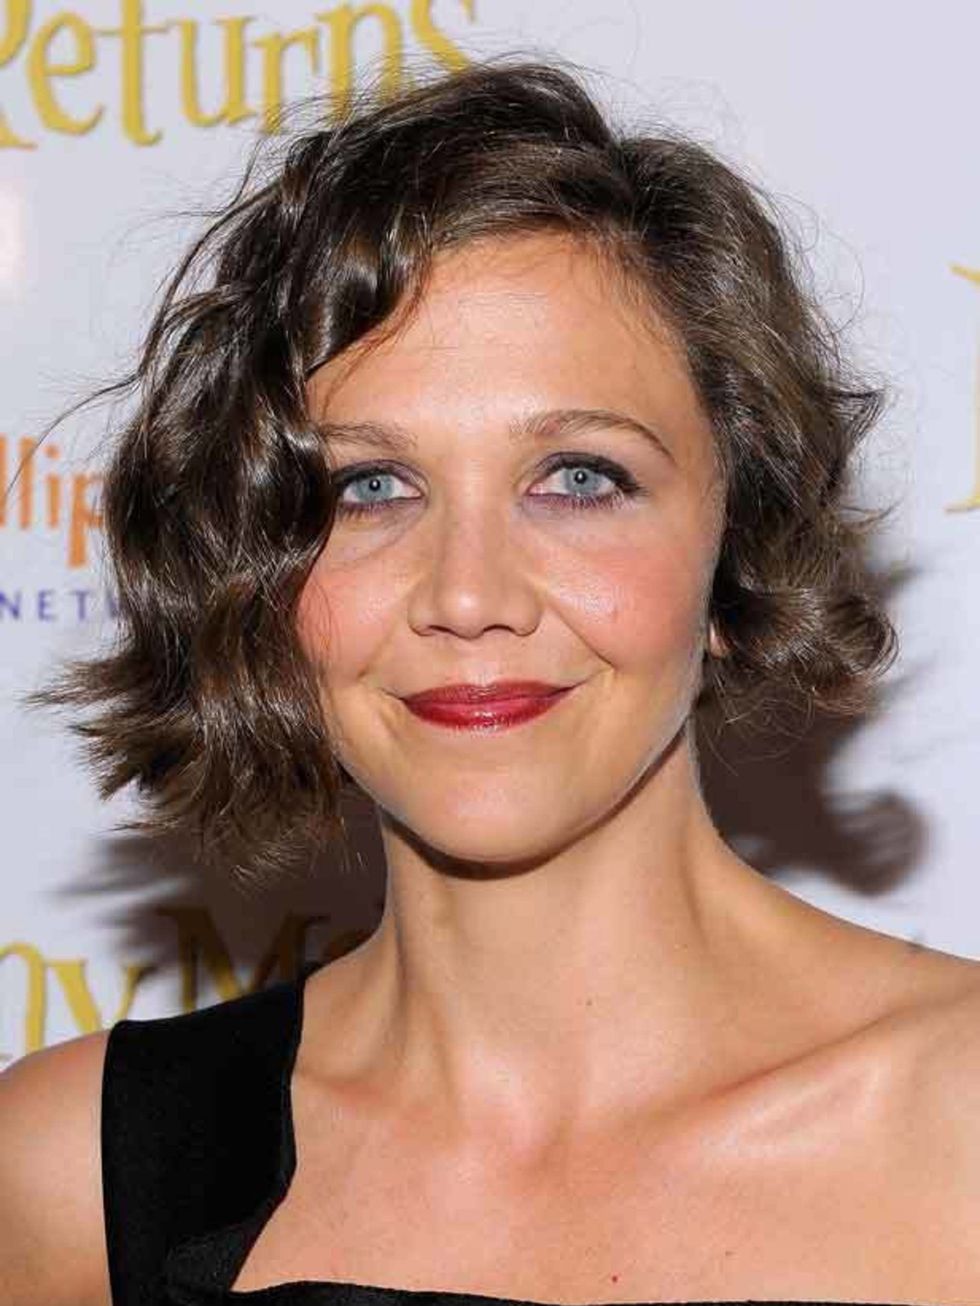 <p>Nanny McPhee Returns Premiere, August 2010</p><p><a href="http://www.elleuk.com/beauty/hair/hair-features/%28section%29/the-expert-guide-to-curly-hair">Read ELLE's guide to curly hair...</a></p>